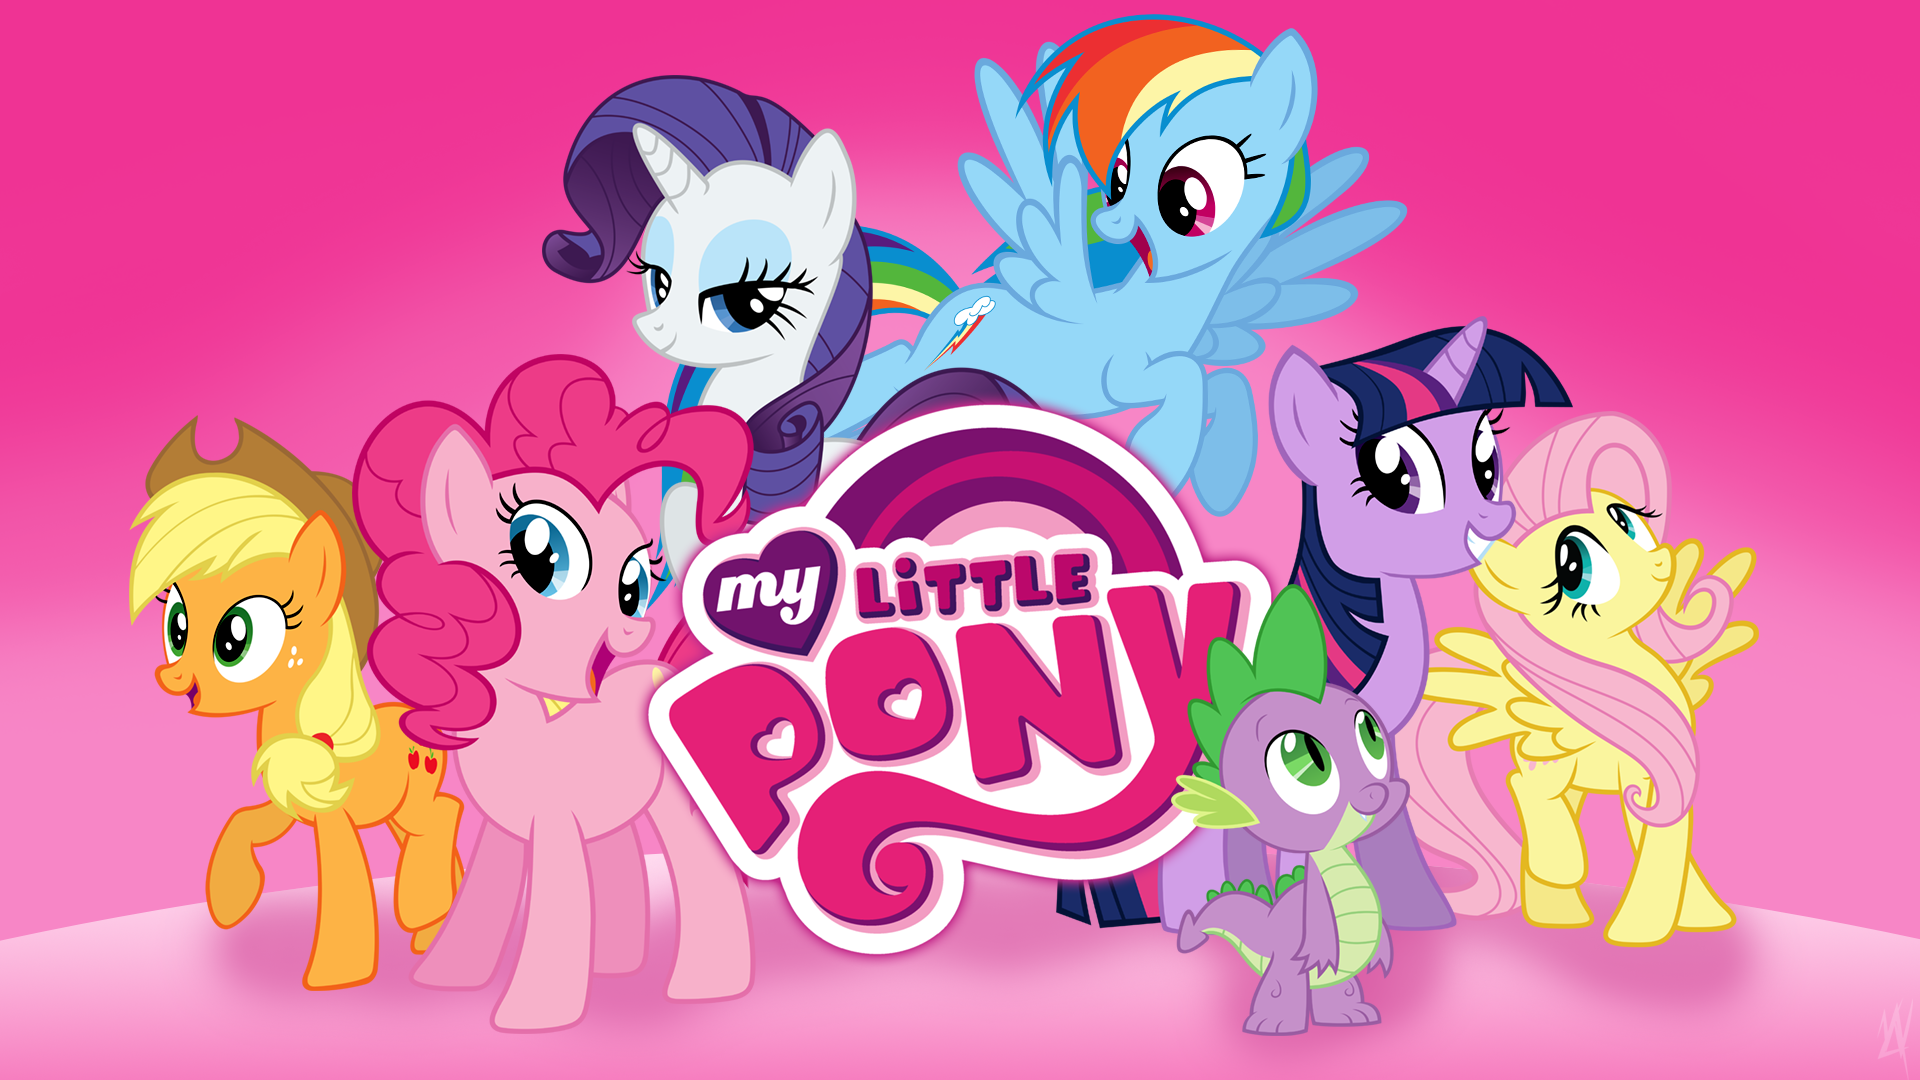 my_little_pony_game_wallpaper__recreated__by_mylittlevisuals-d5l6ts5.png